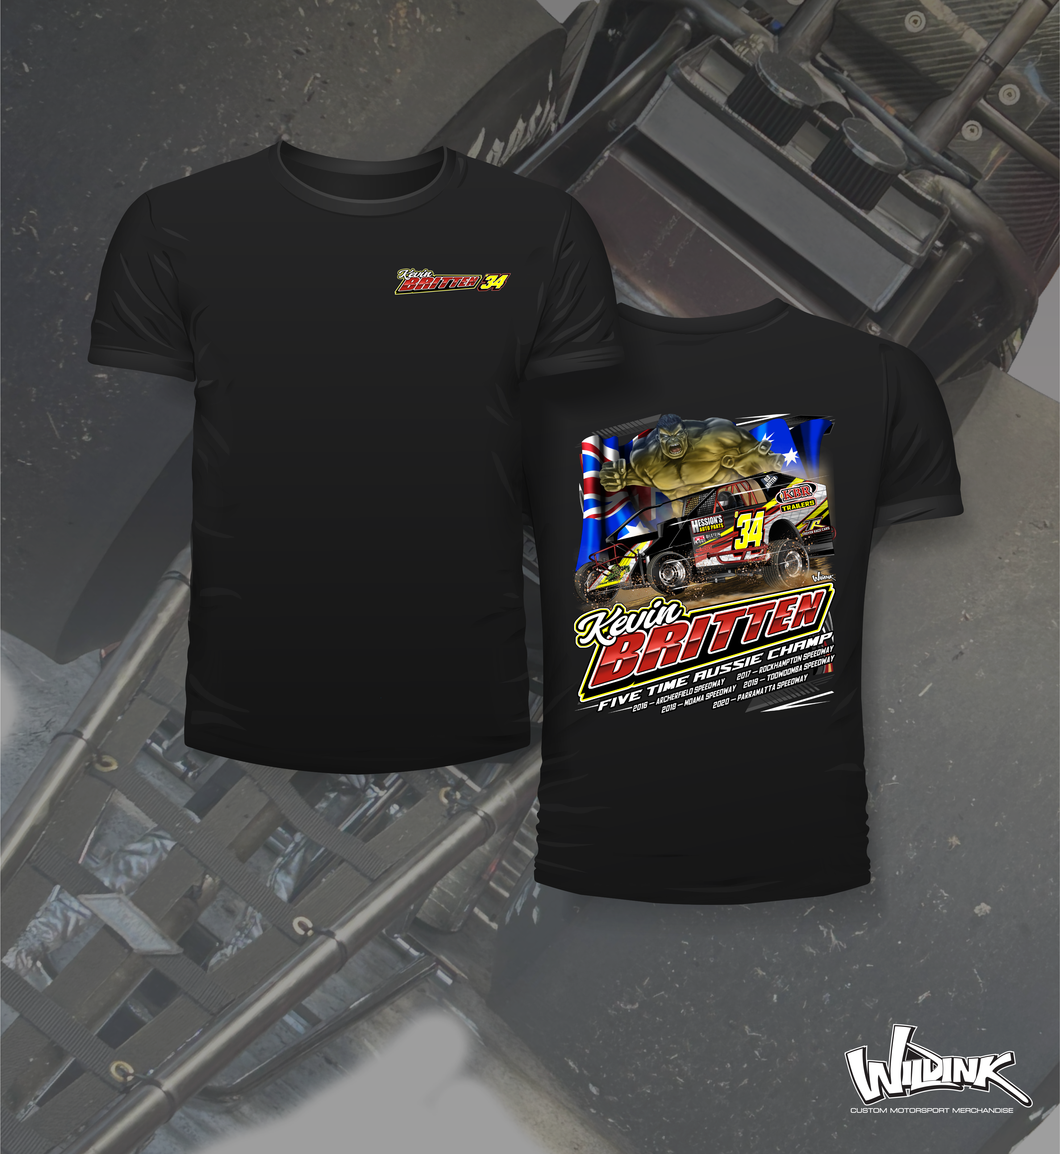 Kevin Britten - Dirt Modified - Two Position Print Tee Shirt